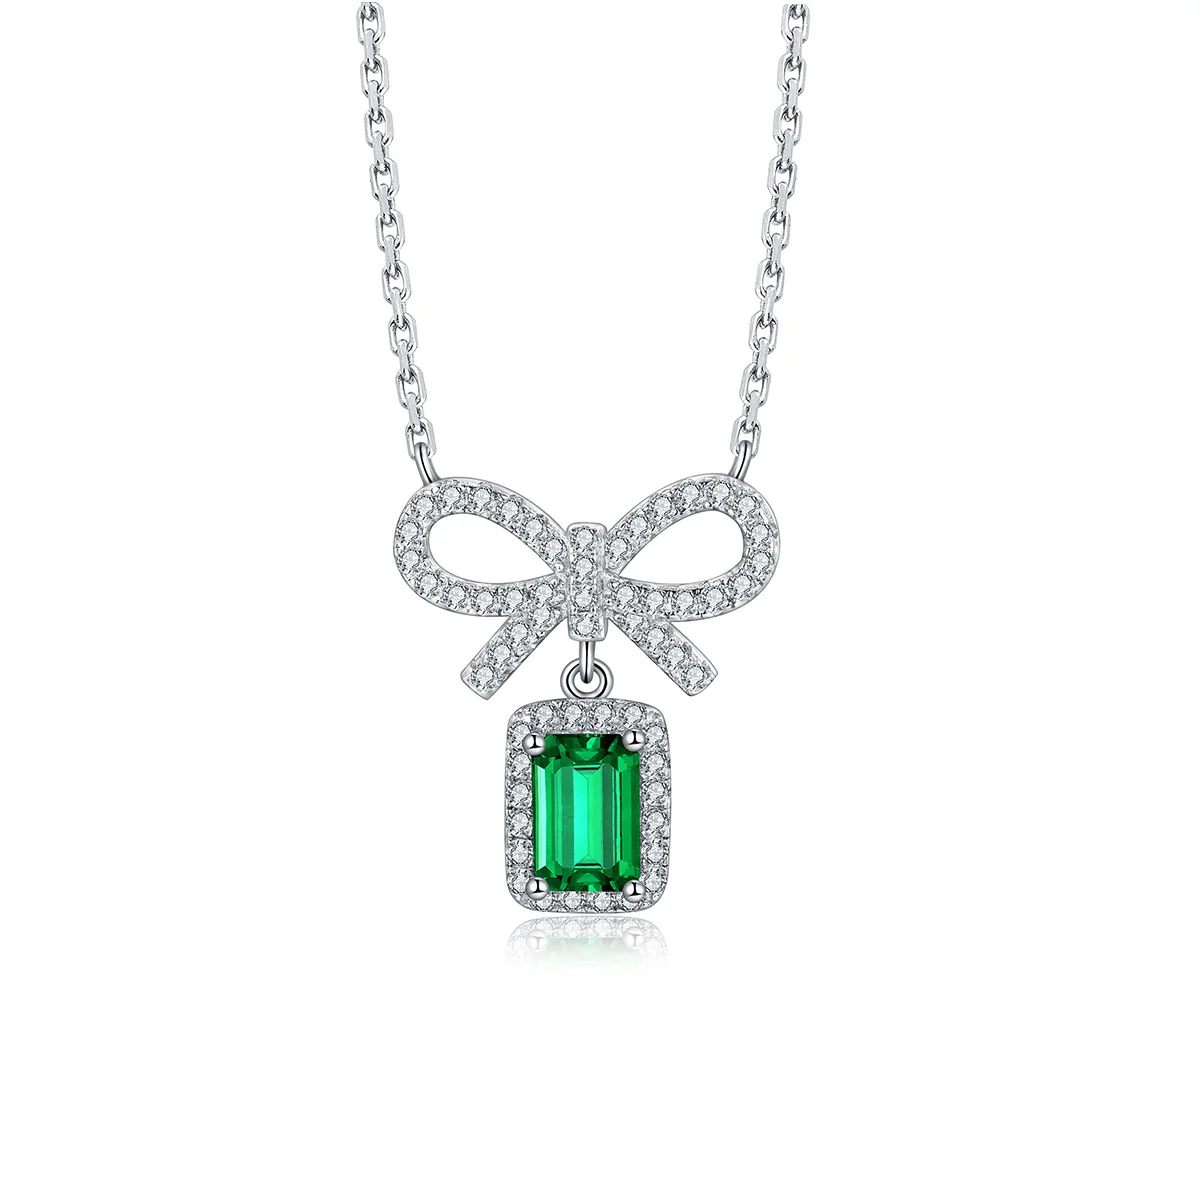 Zhanhao 2021 S925 Silver Chains To Create Jewelry Bow Necklace 0.50CT Zambia Emerald Silver Necklace